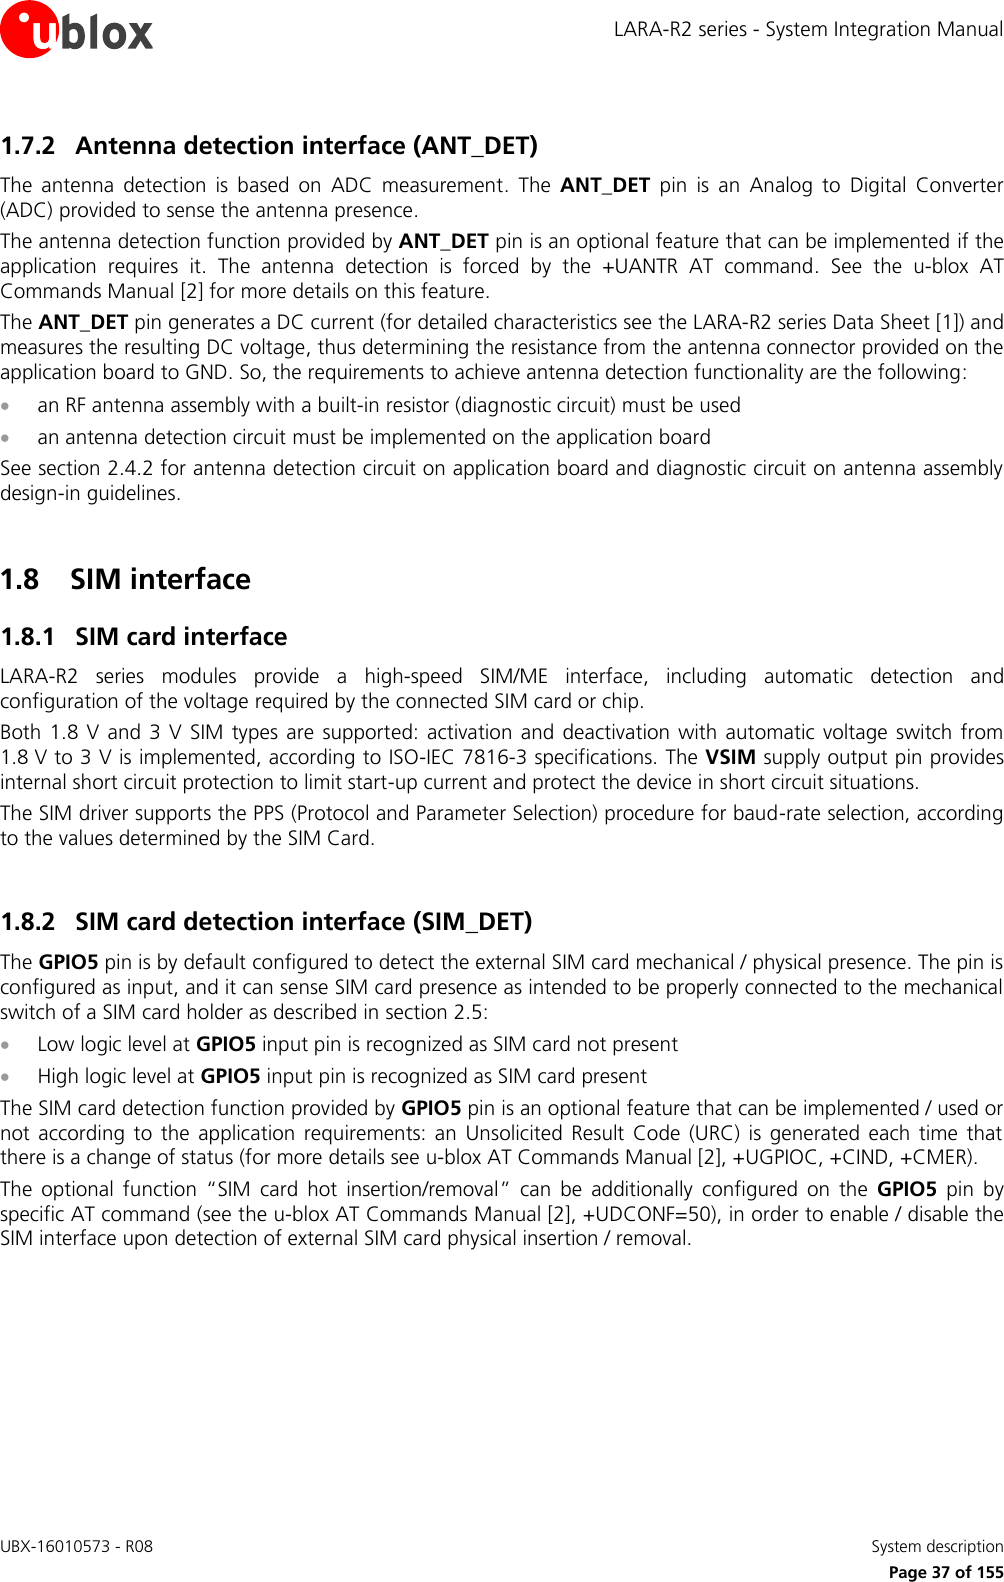 LARA-R2 series - System Integration Manual UBX-16010573 - R08    System description     Page 37 of 155 1.7.2 Antenna detection interface (ANT_DET) The  antenna  detection  is  based  on  ADC  measurement.  The  ANT_DET  pin  is  an  Analog  to  Digital  Converter (ADC) provided to sense the antenna presence. The antenna detection function provided by ANT_DET pin is an optional feature that can be implemented if the application  requires  it.  The  antenna  detection  is  forced  by  the  +UANTR  AT  command.  See  the  u-blox  AT Commands Manual [2] for more details on this feature. The ANT_DET pin generates a DC current (for detailed characteristics see the LARA-R2 series Data Sheet [1]) and measures the resulting DC voltage, thus determining the resistance from the antenna connector provided on the application board to GND. So, the requirements to achieve antenna detection functionality are the following:  an RF antenna assembly with a built-in resistor (diagnostic circuit) must be used  an antenna detection circuit must be implemented on the application board See section 2.4.2 for antenna detection circuit on application board and diagnostic circuit on antenna assembly design-in guidelines.  1.8 SIM interface 1.8.1 SIM card interface LARA-R2  series  modules  provide  a  high-speed  SIM/ME  interface,  including  automatic  detection  and configuration of the voltage required by the connected SIM card or chip. Both 1.8  V  and 3 V SIM  types  are  supported:  activation and  deactivation  with  automatic  voltage  switch  from 1.8 V to 3 V is implemented, according to ISO-IEC 7816-3 specifications. The VSIM supply output pin provides internal short circuit protection to limit start-up current and protect the device in short circuit situations. The SIM driver supports the PPS (Protocol and Parameter Selection) procedure for baud-rate selection, according to the values determined by the SIM Card.  1.8.2 SIM card detection interface (SIM_DET) The GPIO5 pin is by default configured to detect the external SIM card mechanical / physical presence. The pin is configured as input, and it can sense SIM card presence as intended to be properly connected to the mechanical switch of a SIM card holder as described in section 2.5:  Low logic level at GPIO5 input pin is recognized as SIM card not present  High logic level at GPIO5 input pin is recognized as SIM card present The SIM card detection function provided by GPIO5 pin is an optional feature that can be implemented / used or not  according  to  the  application  requirements:  an  Unsolicited  Result  Code  (URC)  is  generated  each  time  that there is a change of status (for more details see u-blox AT Commands Manual [2], +UGPIOC, +CIND, +CMER). The  optional  function  “SIM  card  hot  insertion/removal”  can  be  additionally  configured  on  the  GPIO5  pin  by specific AT command (see the u-blox AT Commands Manual [2], +UDCONF=50), in order to enable / disable the SIM interface upon detection of external SIM card physical insertion / removal.   